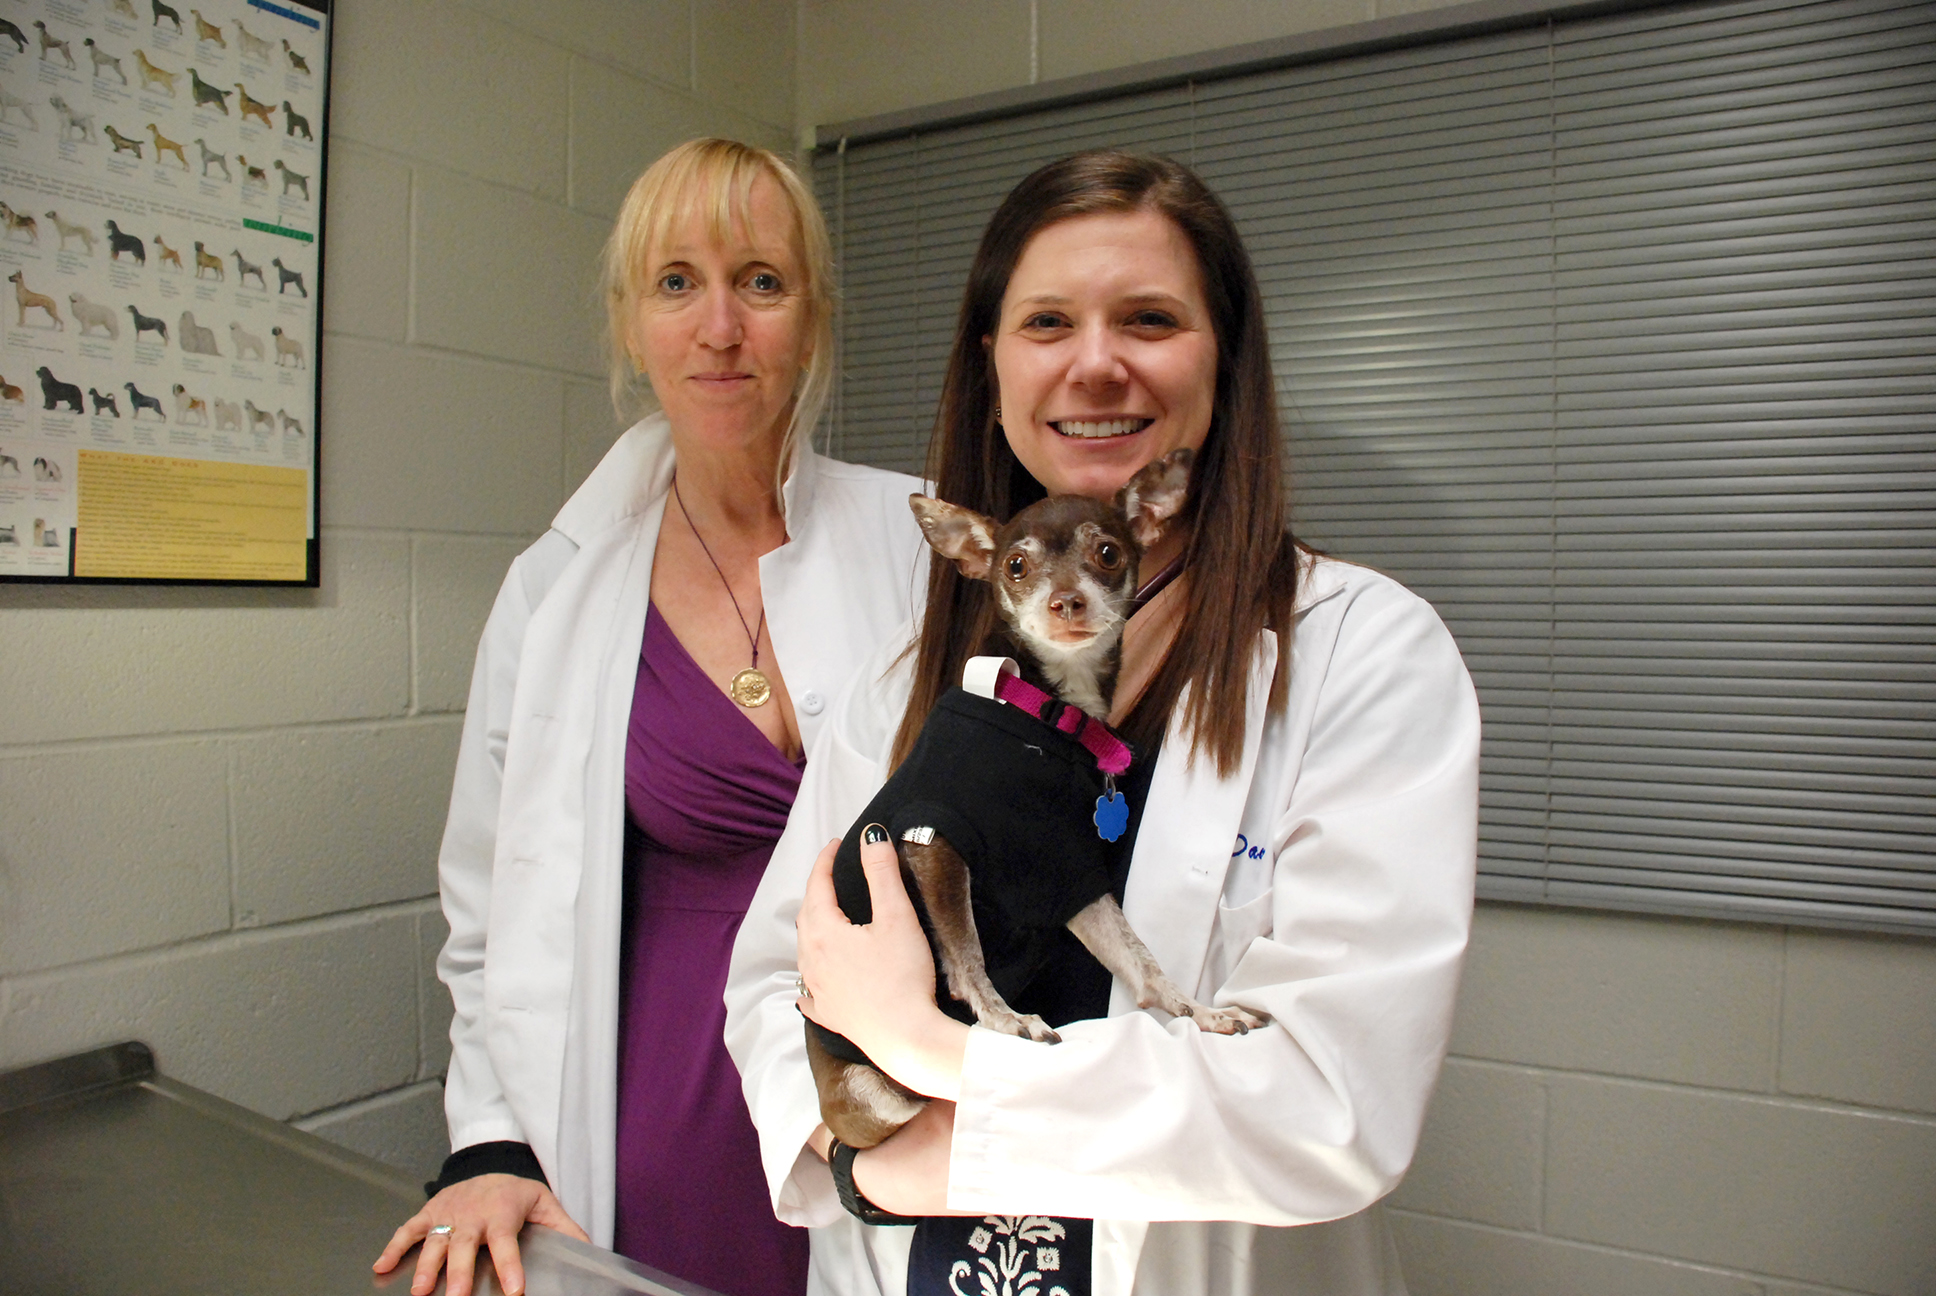 two smiling veterinarians in an exam room, one holding a Chihuahua dog